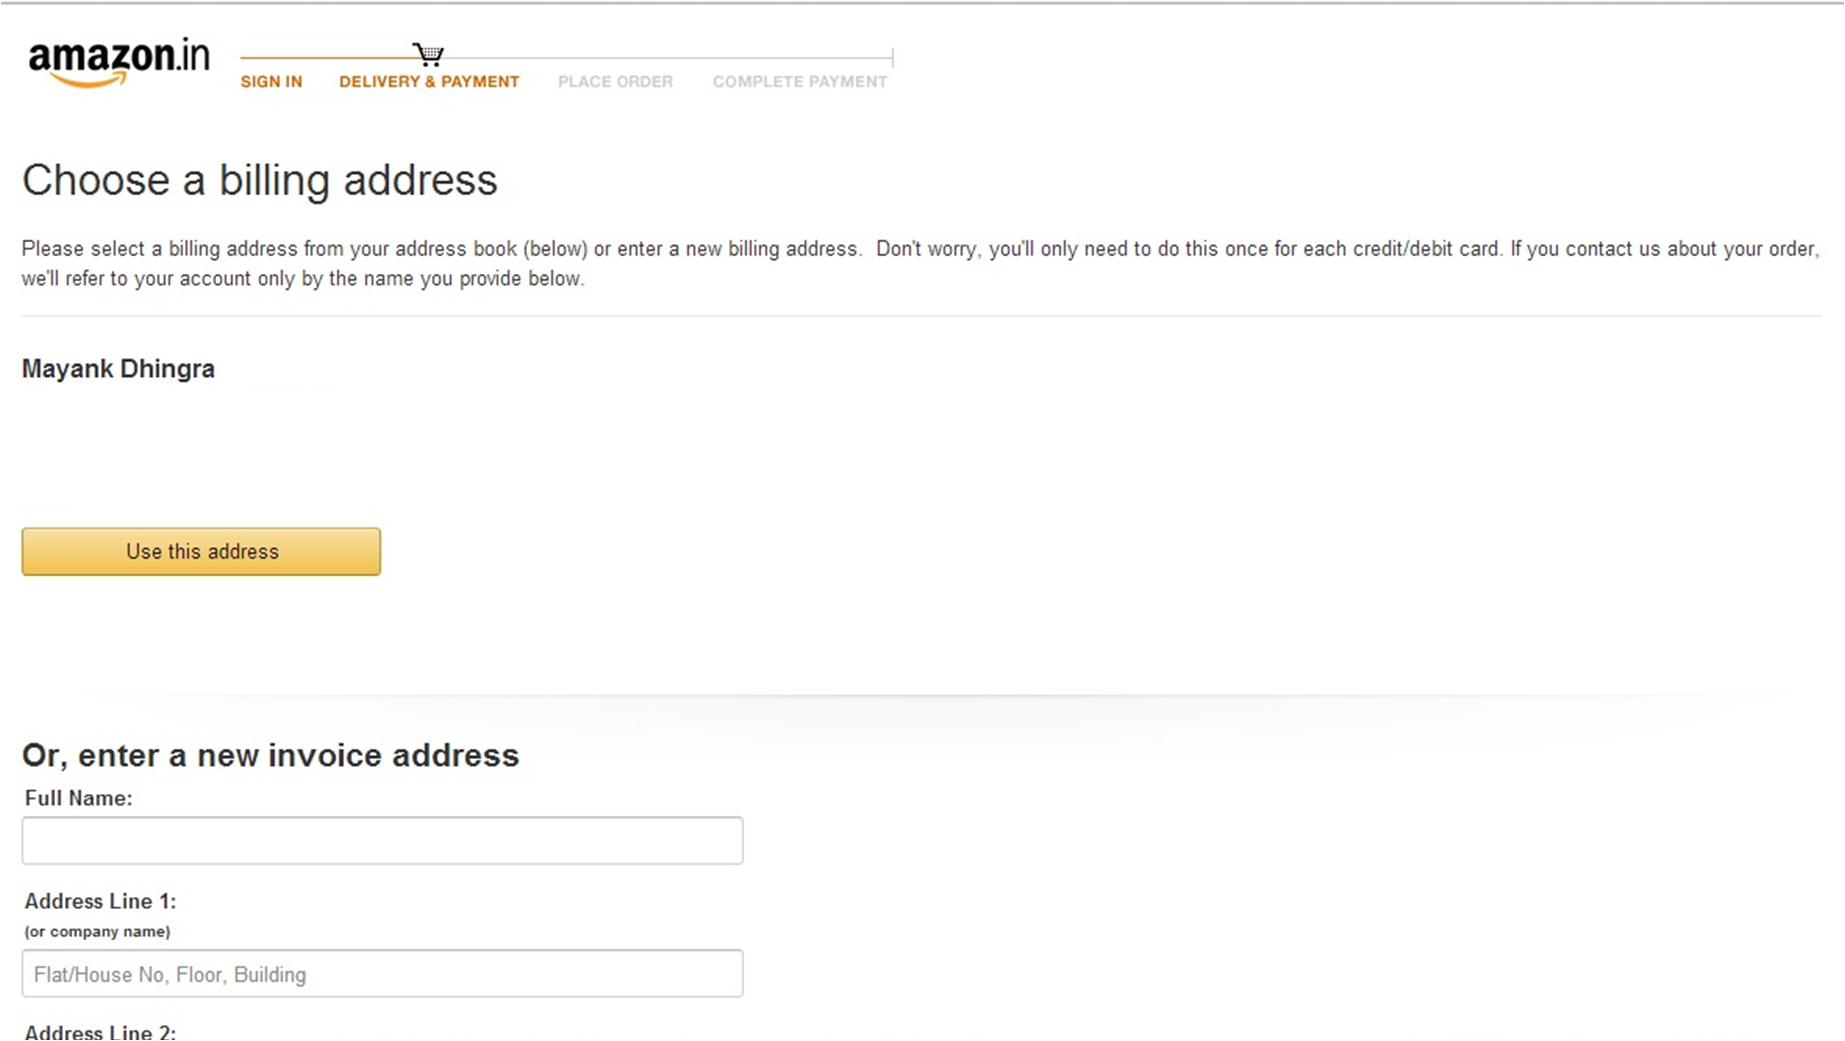 Billing Address Page - Amazon.in